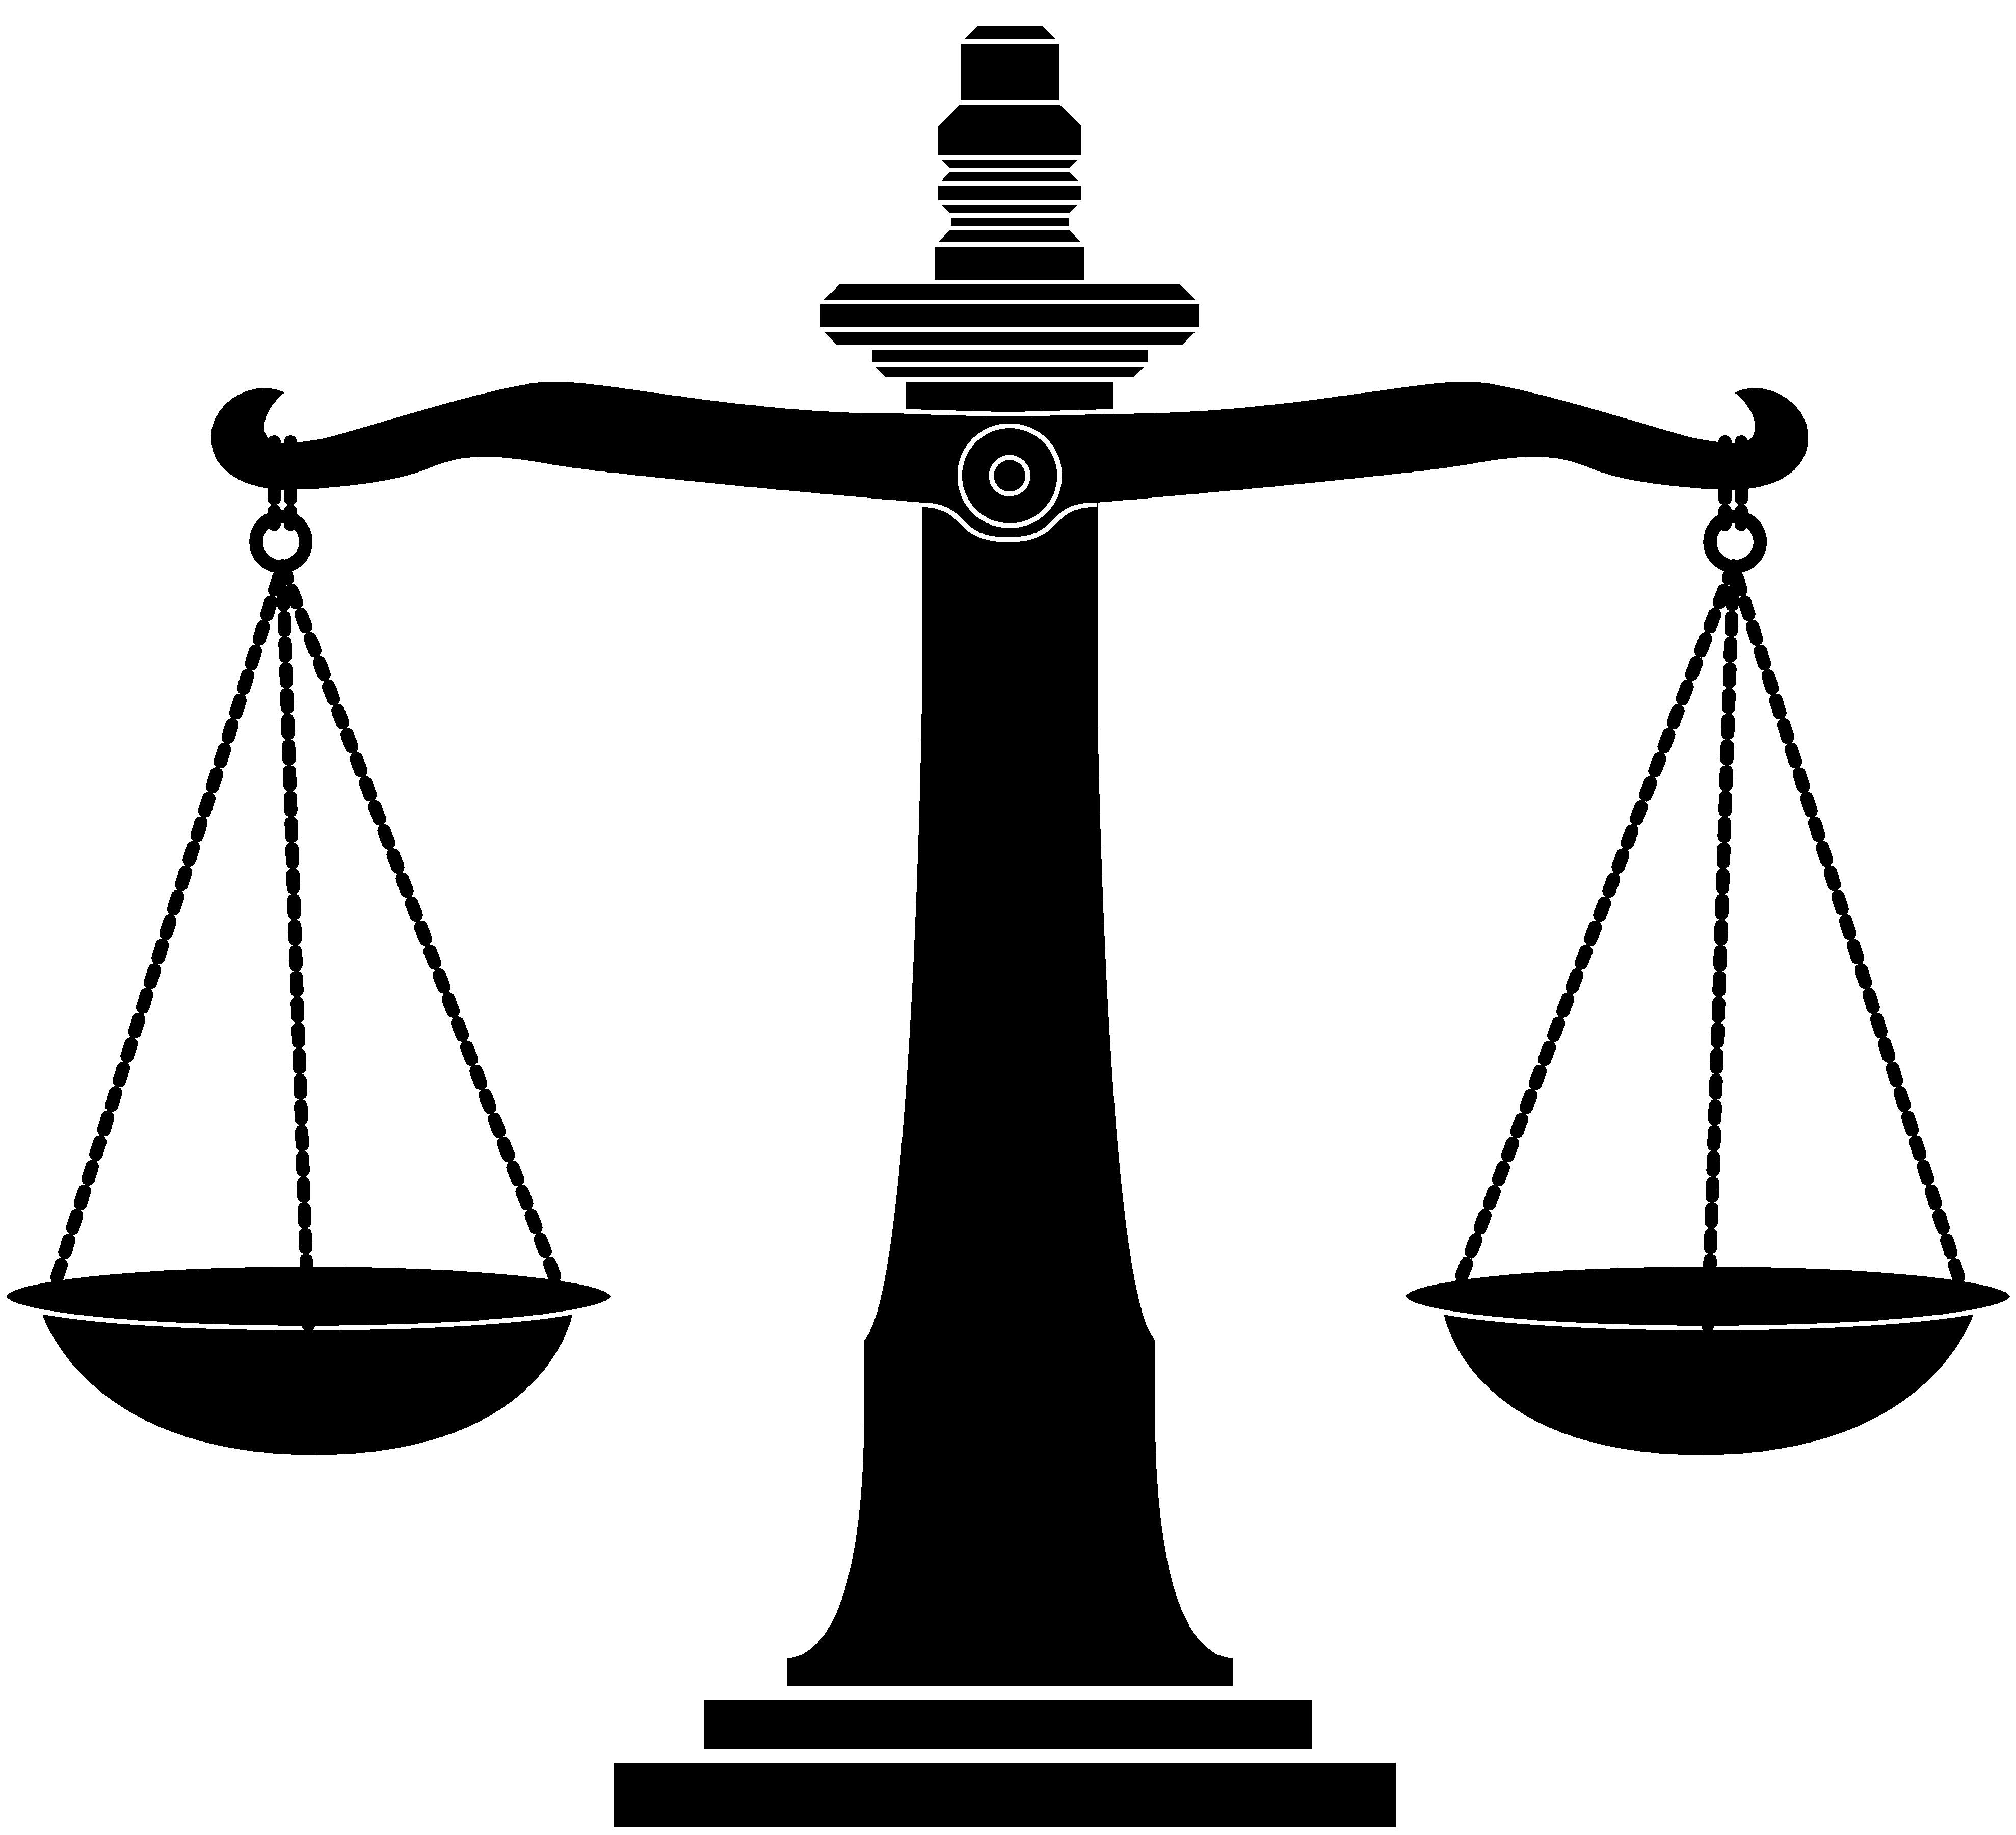 Scales Of Justice